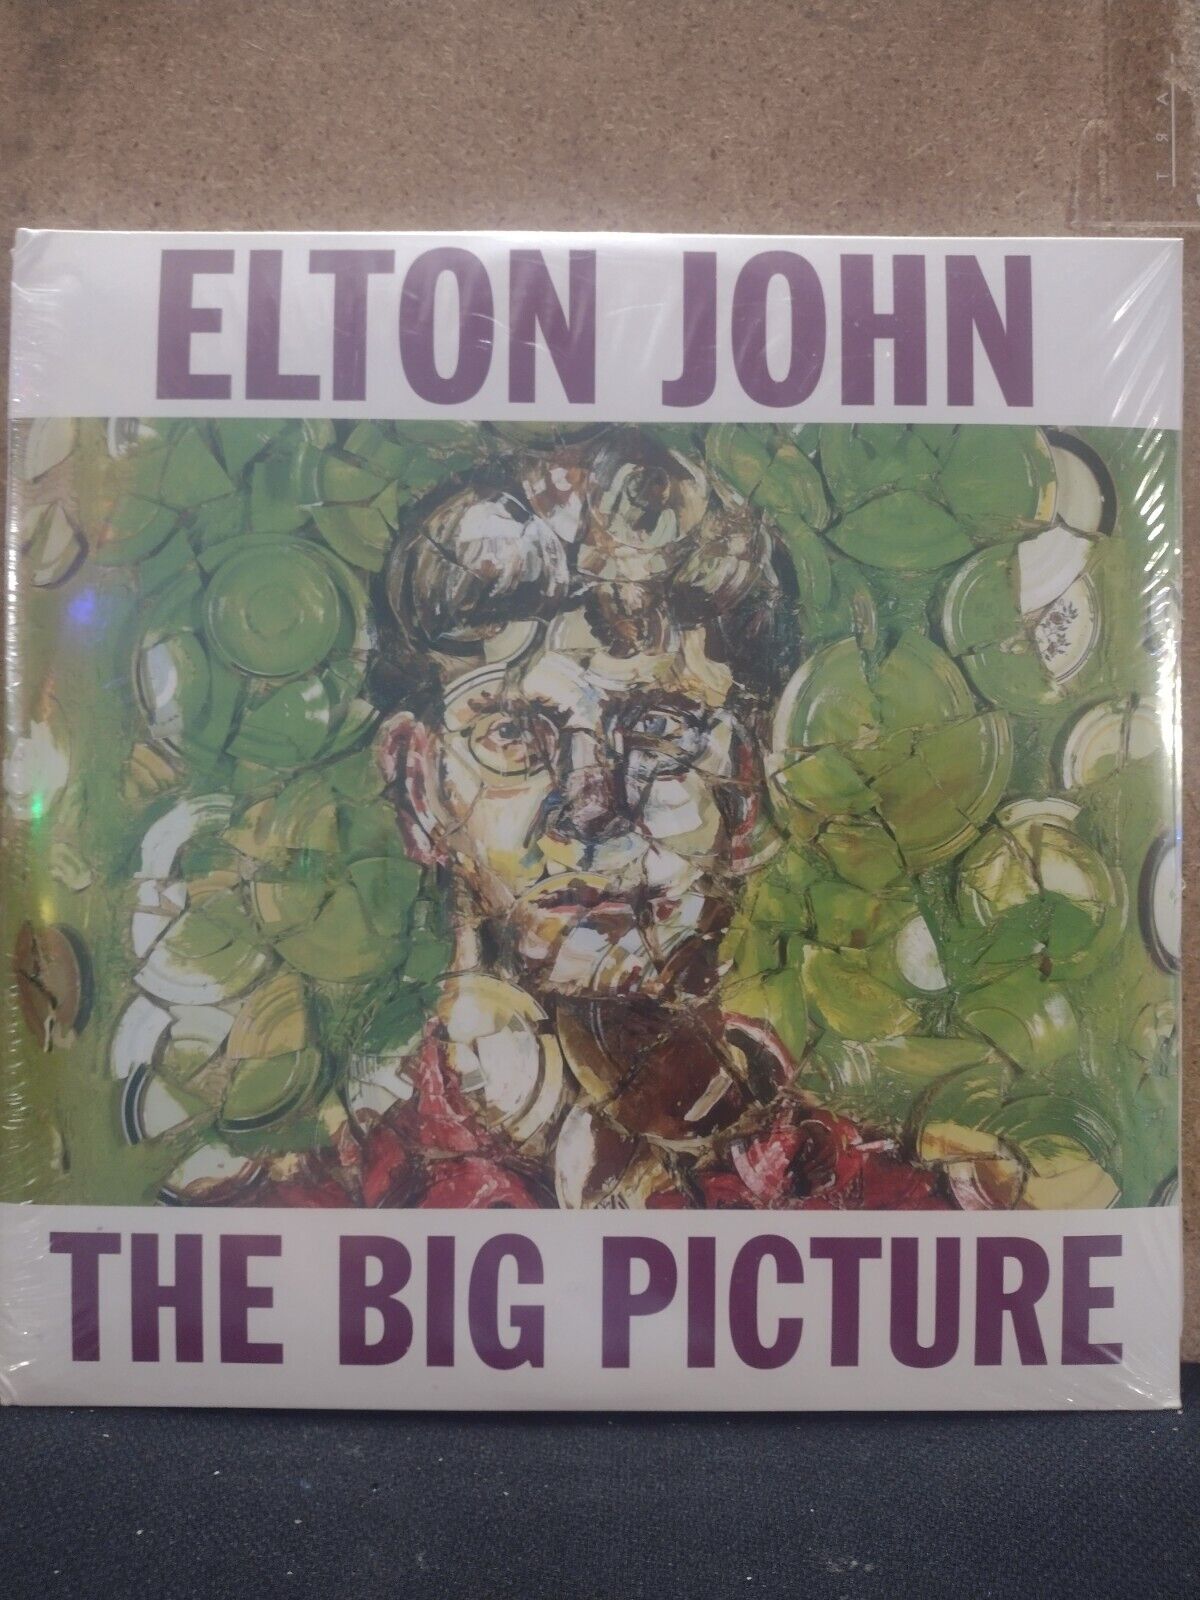 The Big Picture by Elton John (Record, 2017)